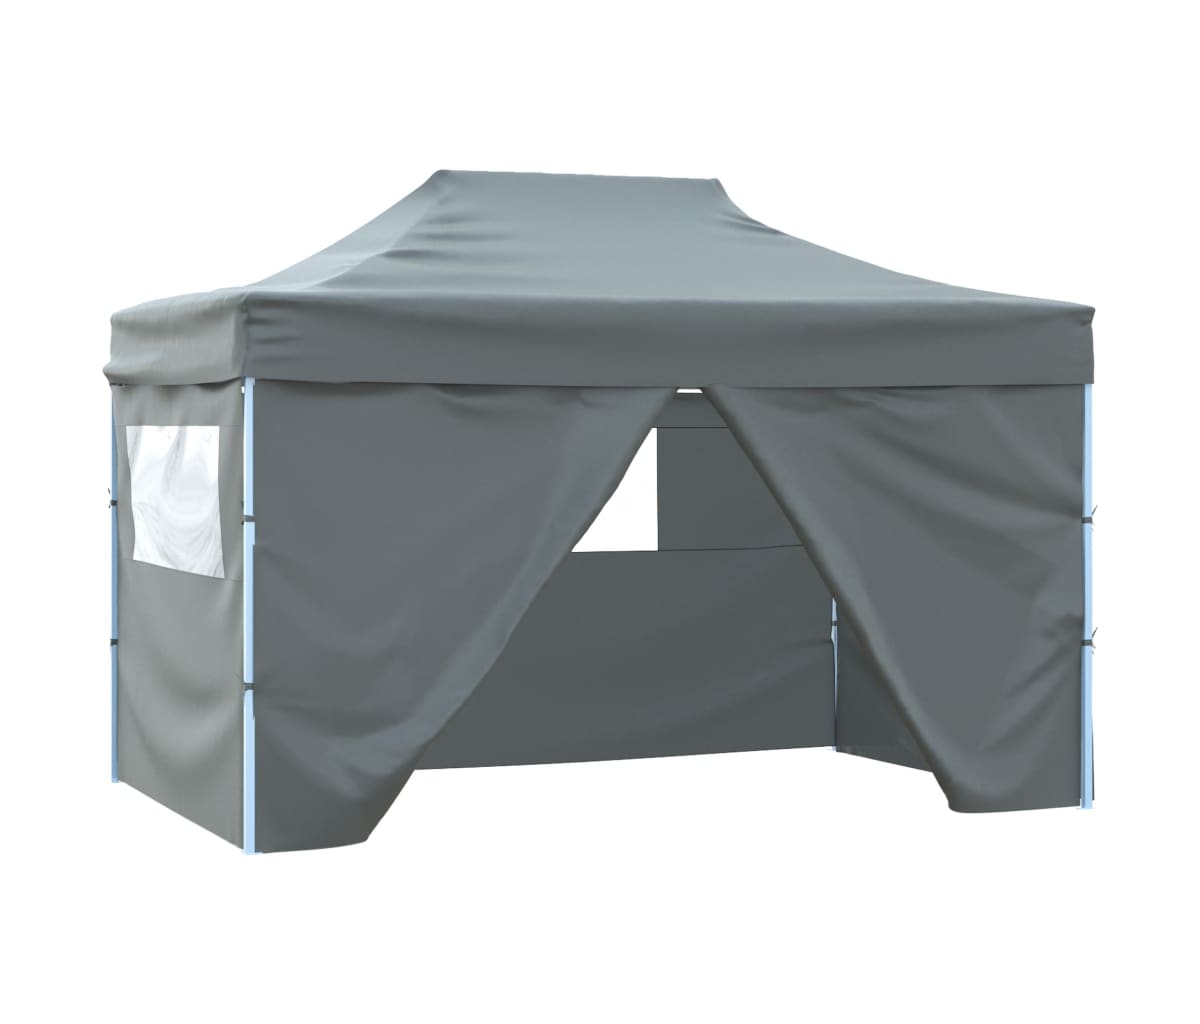 Professional Folding Party Tent with 4 Sidewalls 9.8'x13.1' Steel Anthracite - Dark Grey